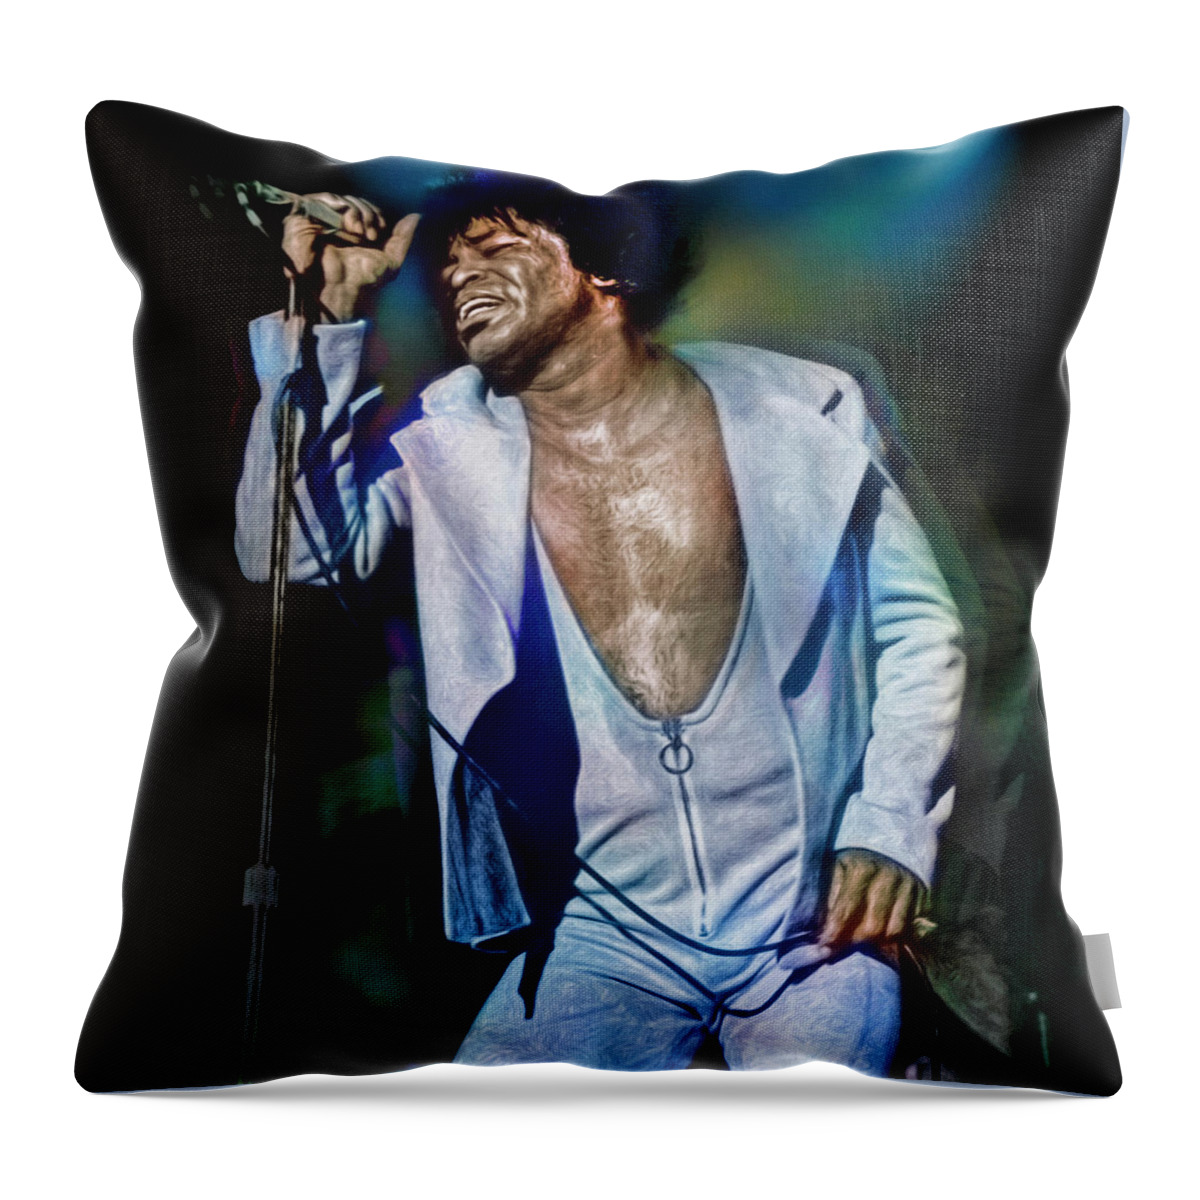 James Brown Throw Pillow featuring the digital art I Feel Good by Mal Bray